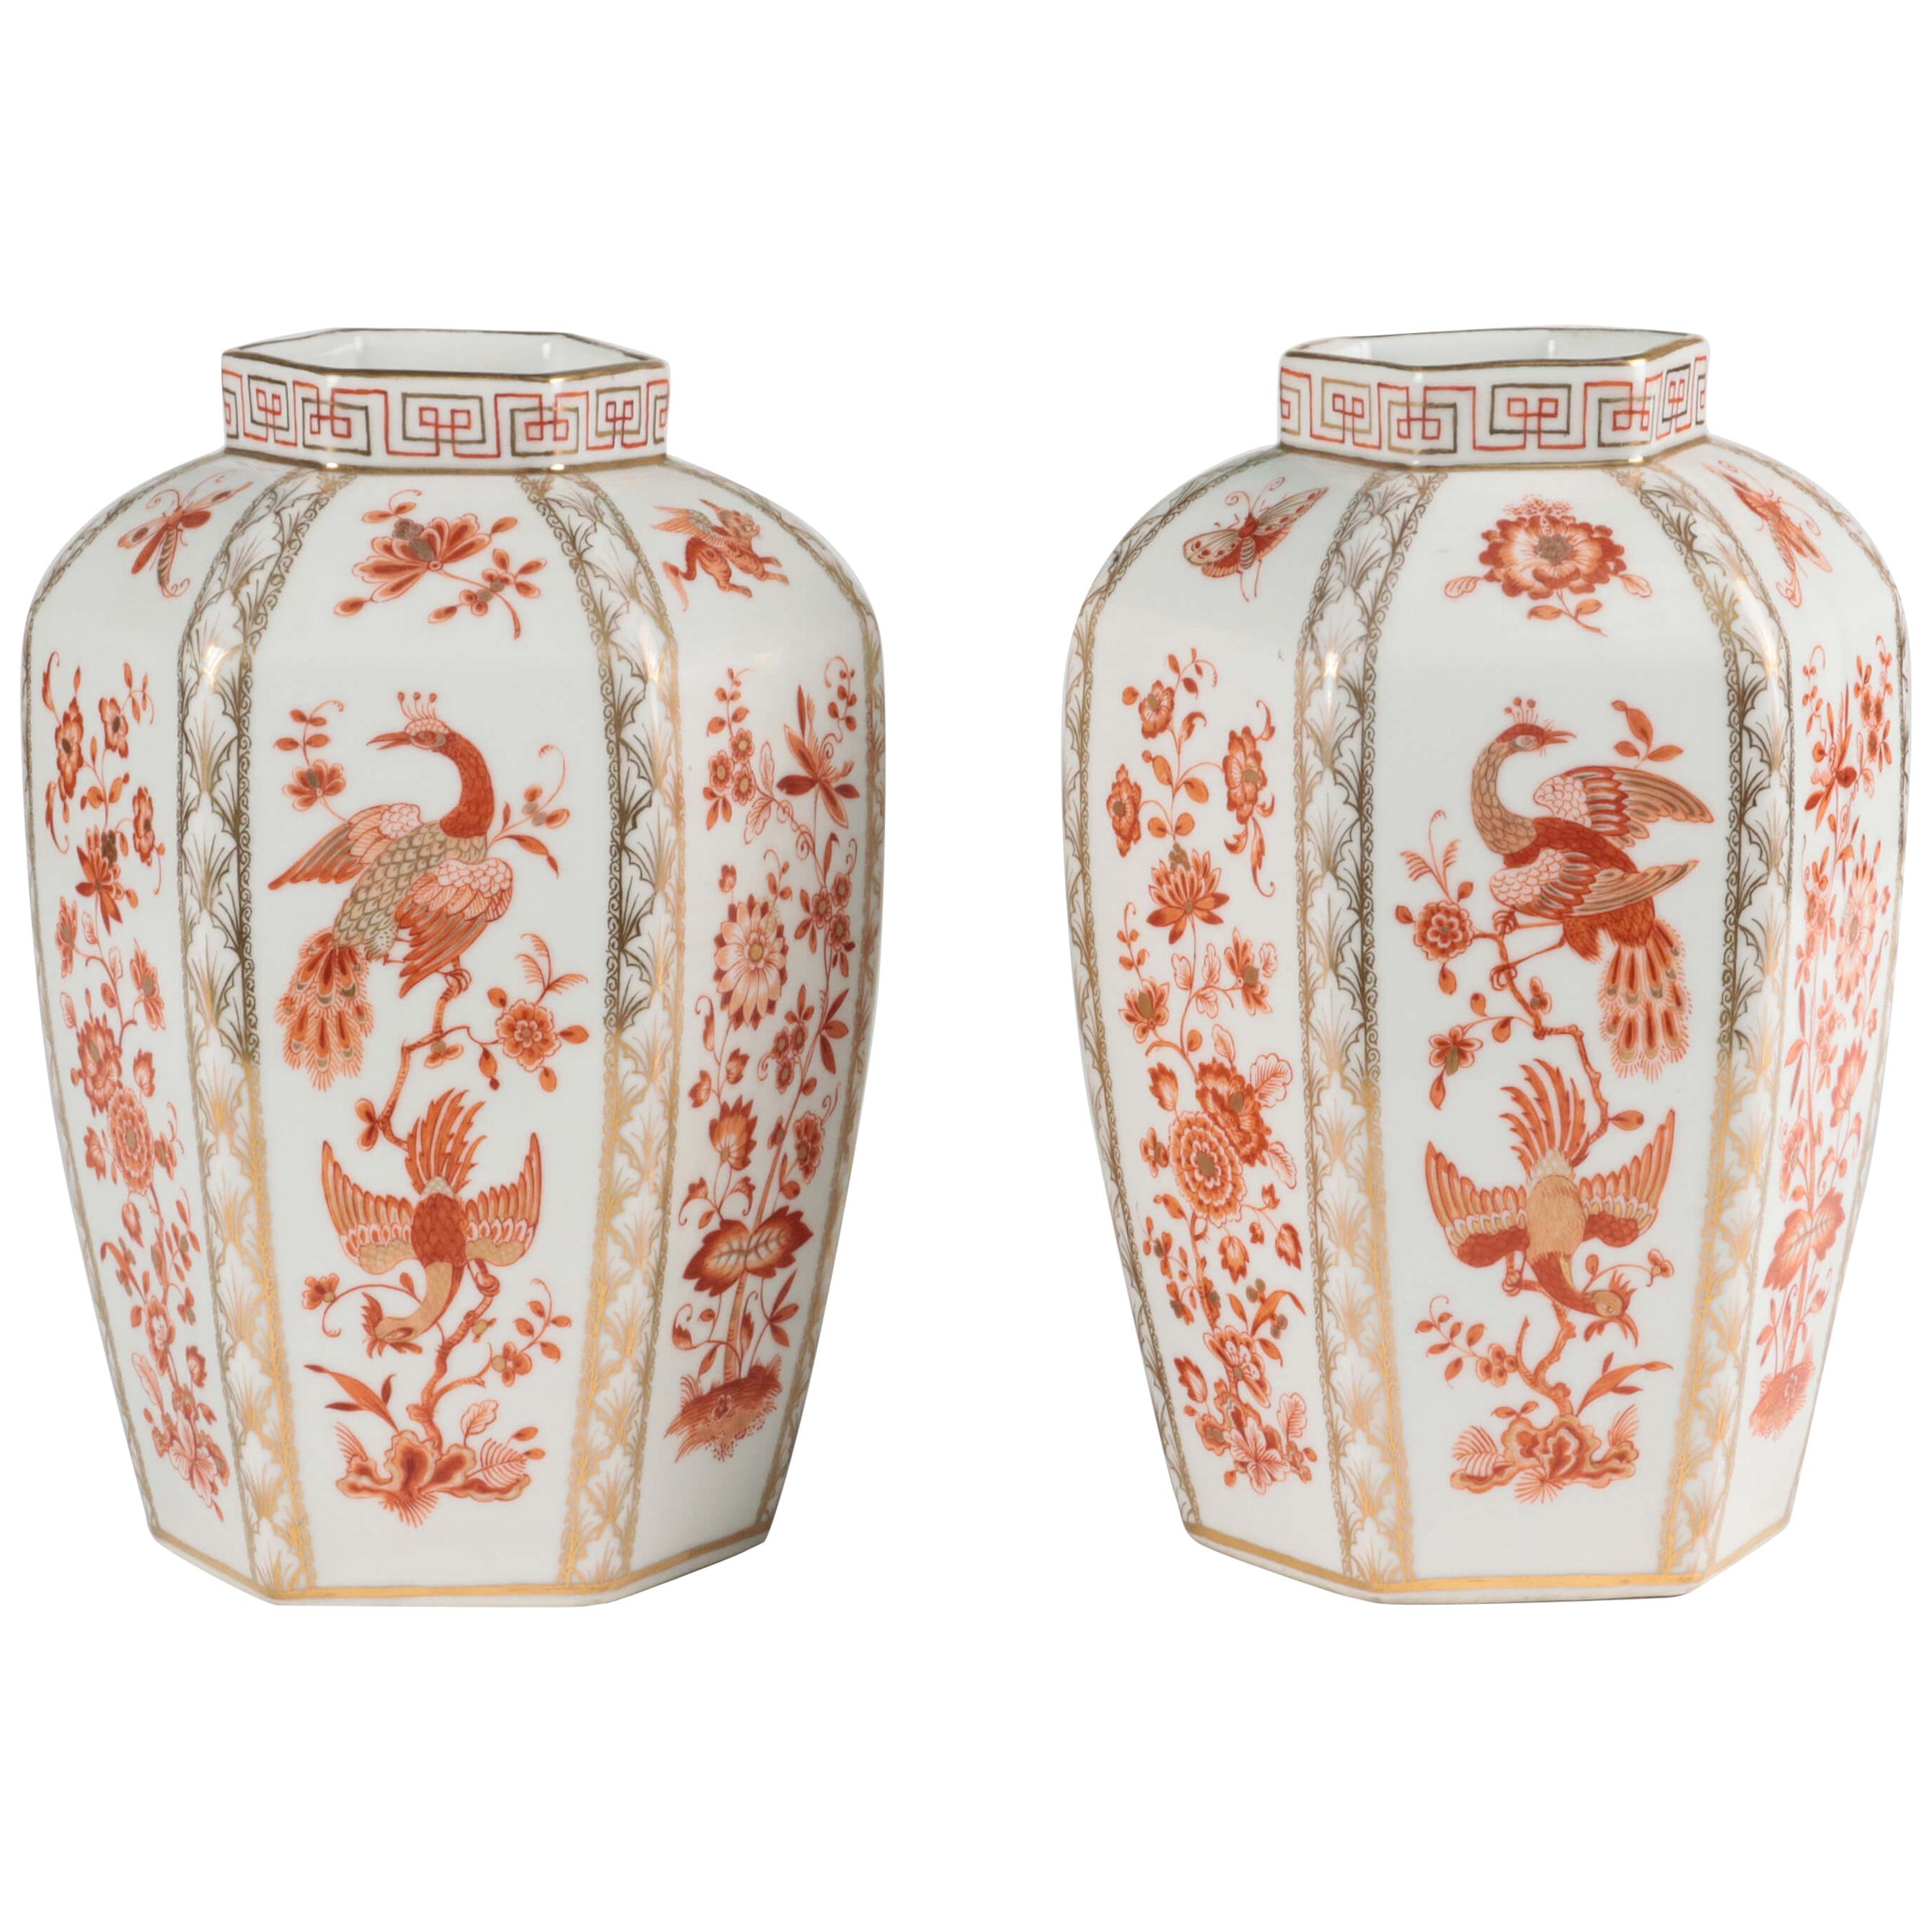 Pair of 19th Century Porcelain Vases by Helena Wolfsohn